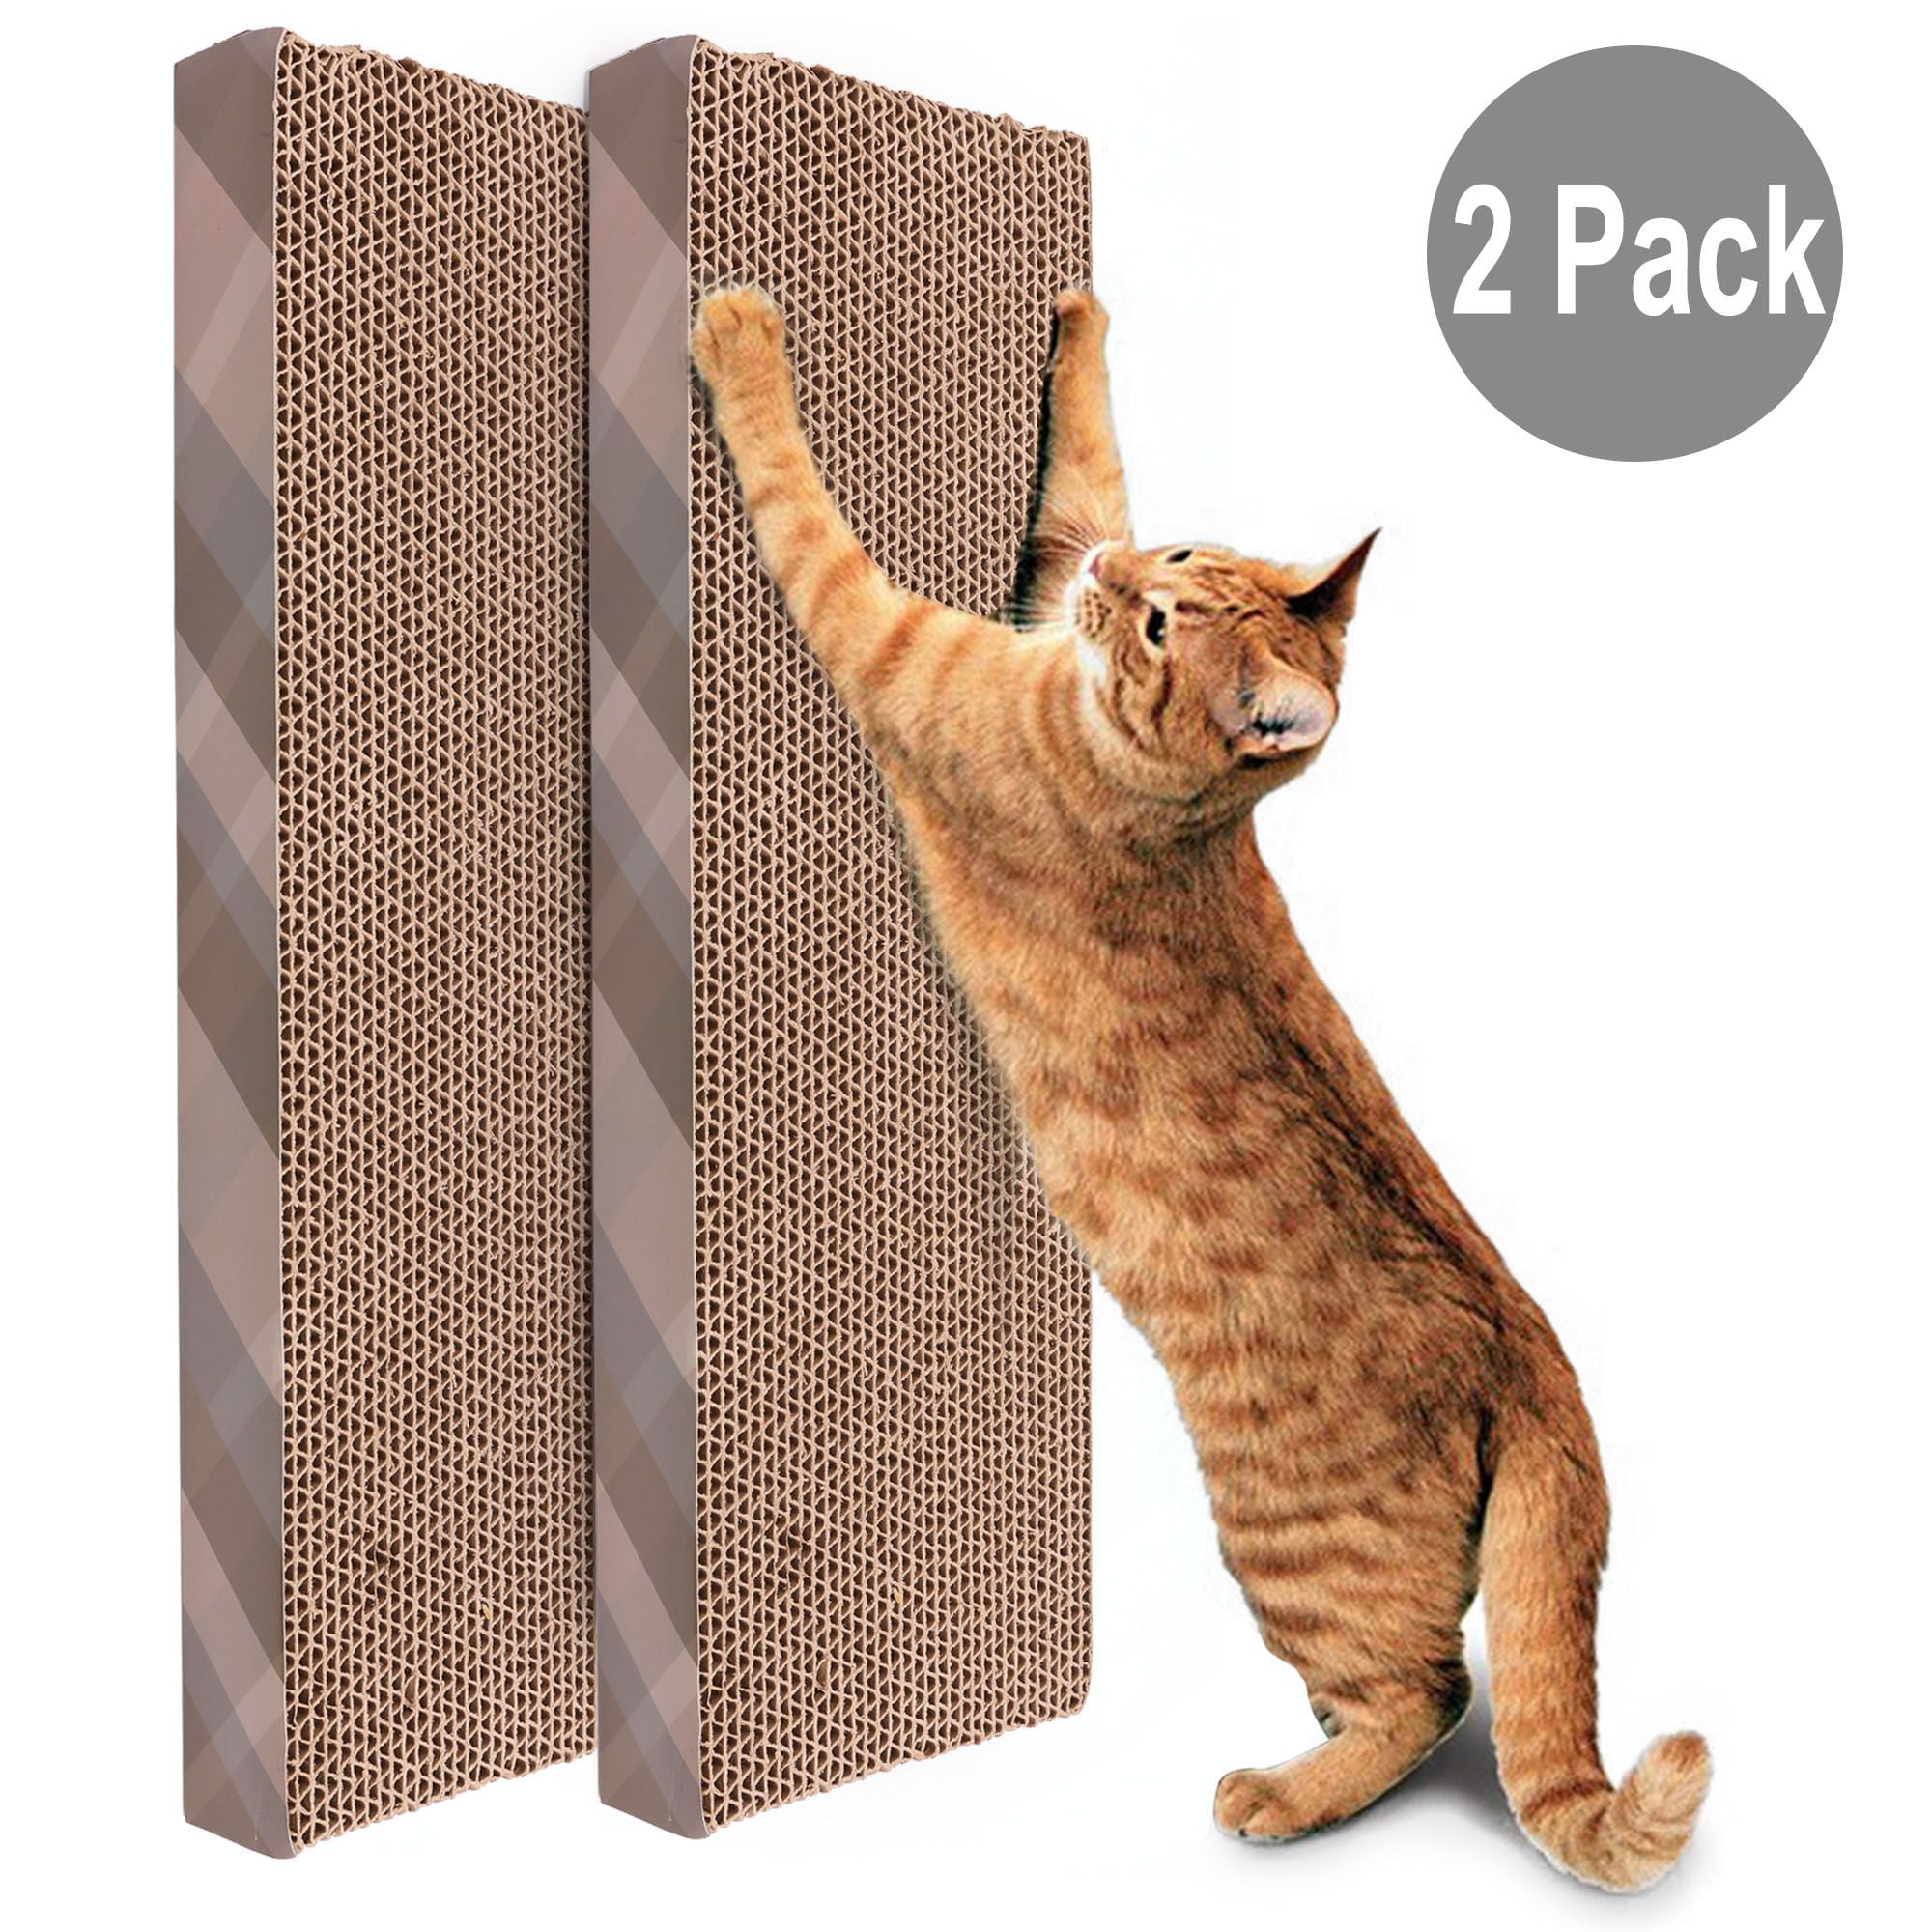 ScratchMe Cat Scratching Post Lounge Bed Durable Recycle Pad Toy Prevents Furniture Damage Round Shape Cat Scratcher Cardboard Board Pads with Catnip